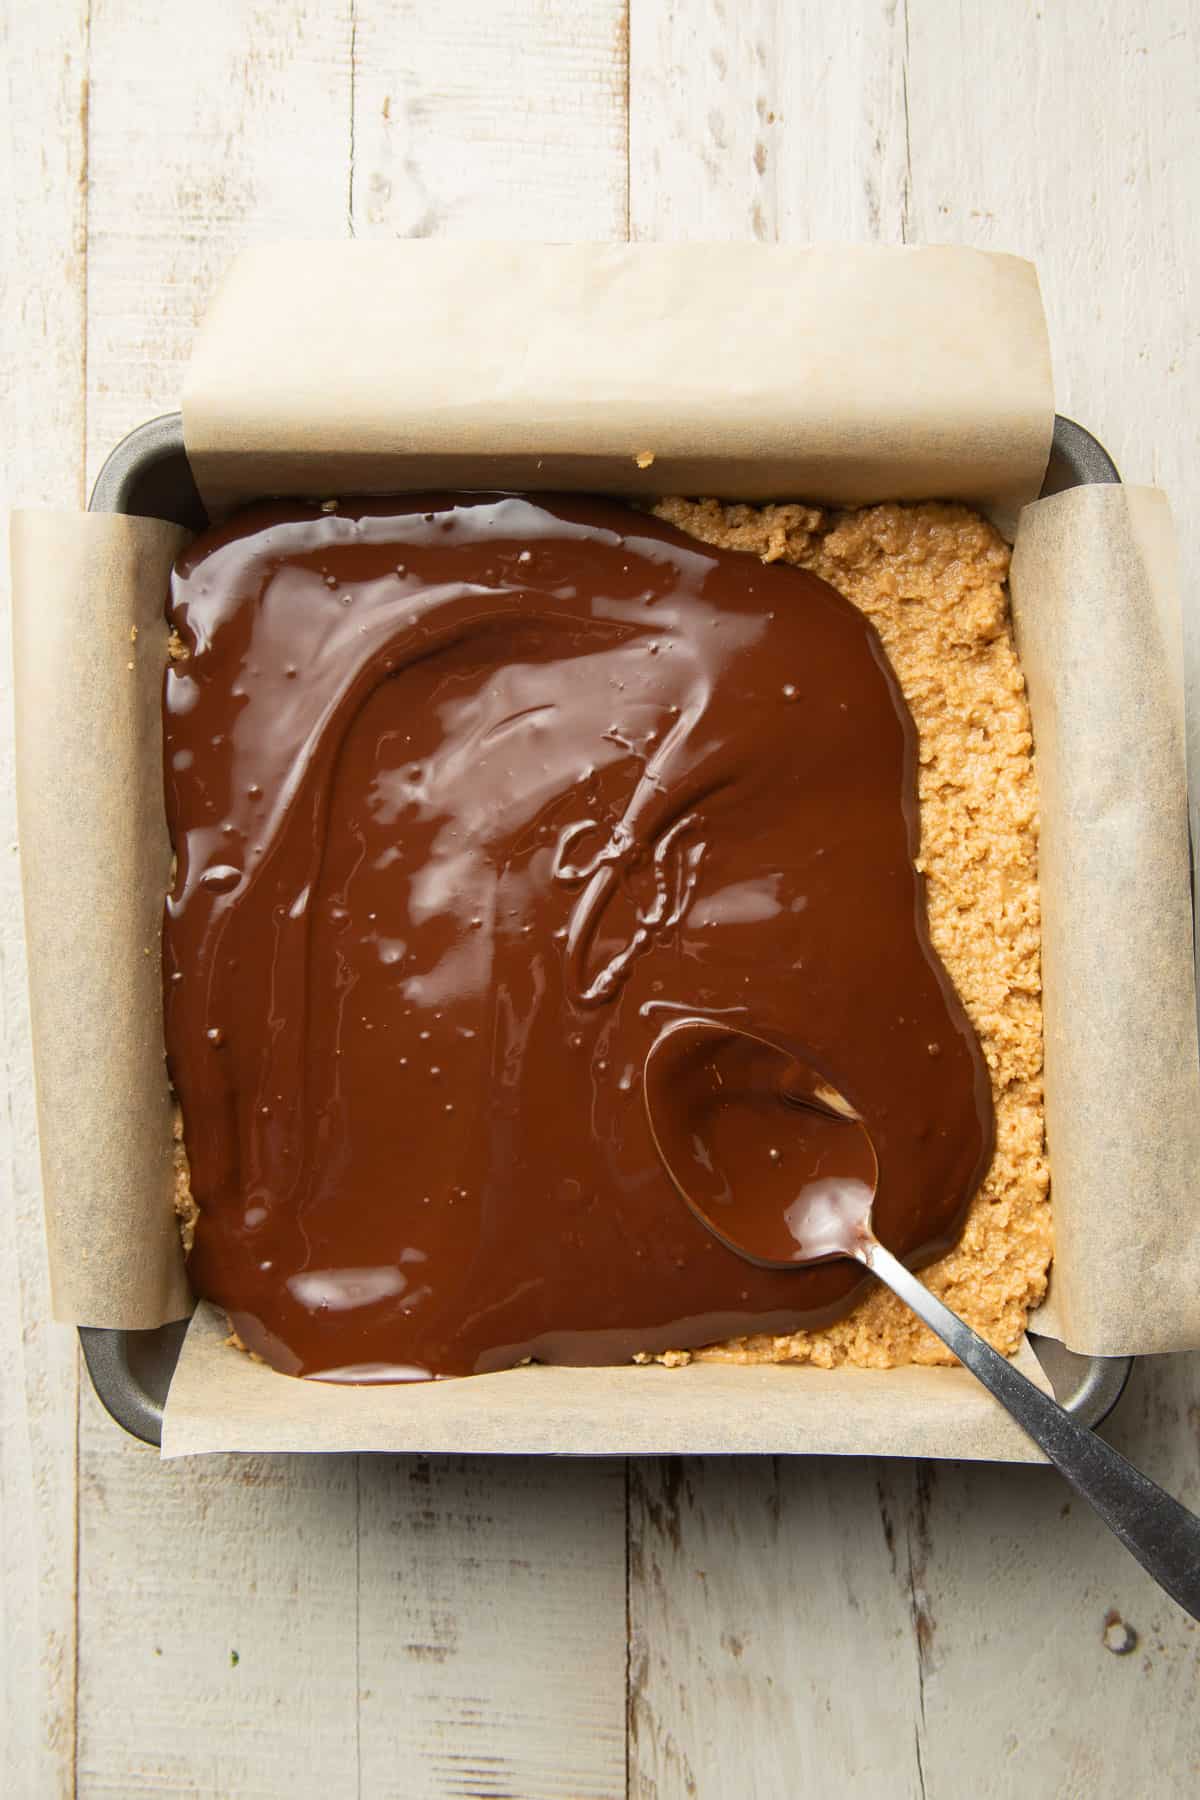 Melted chocolate over a base of peanut butter and graham cracker crumbs in a baking pan.